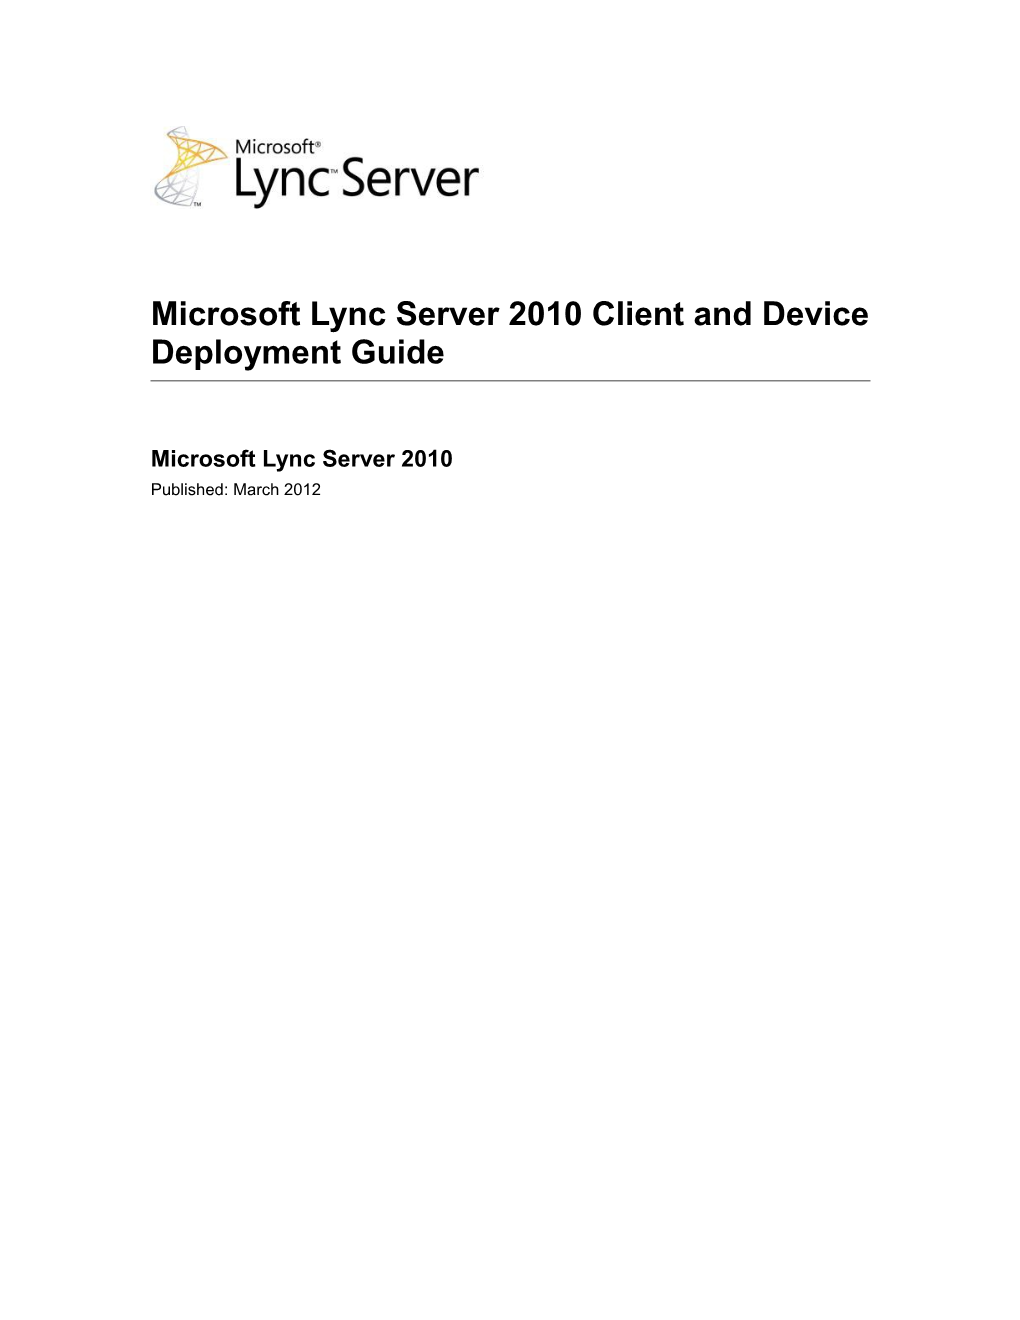 Microsoft Lync Server 2010 Client and Device Deployment Guide